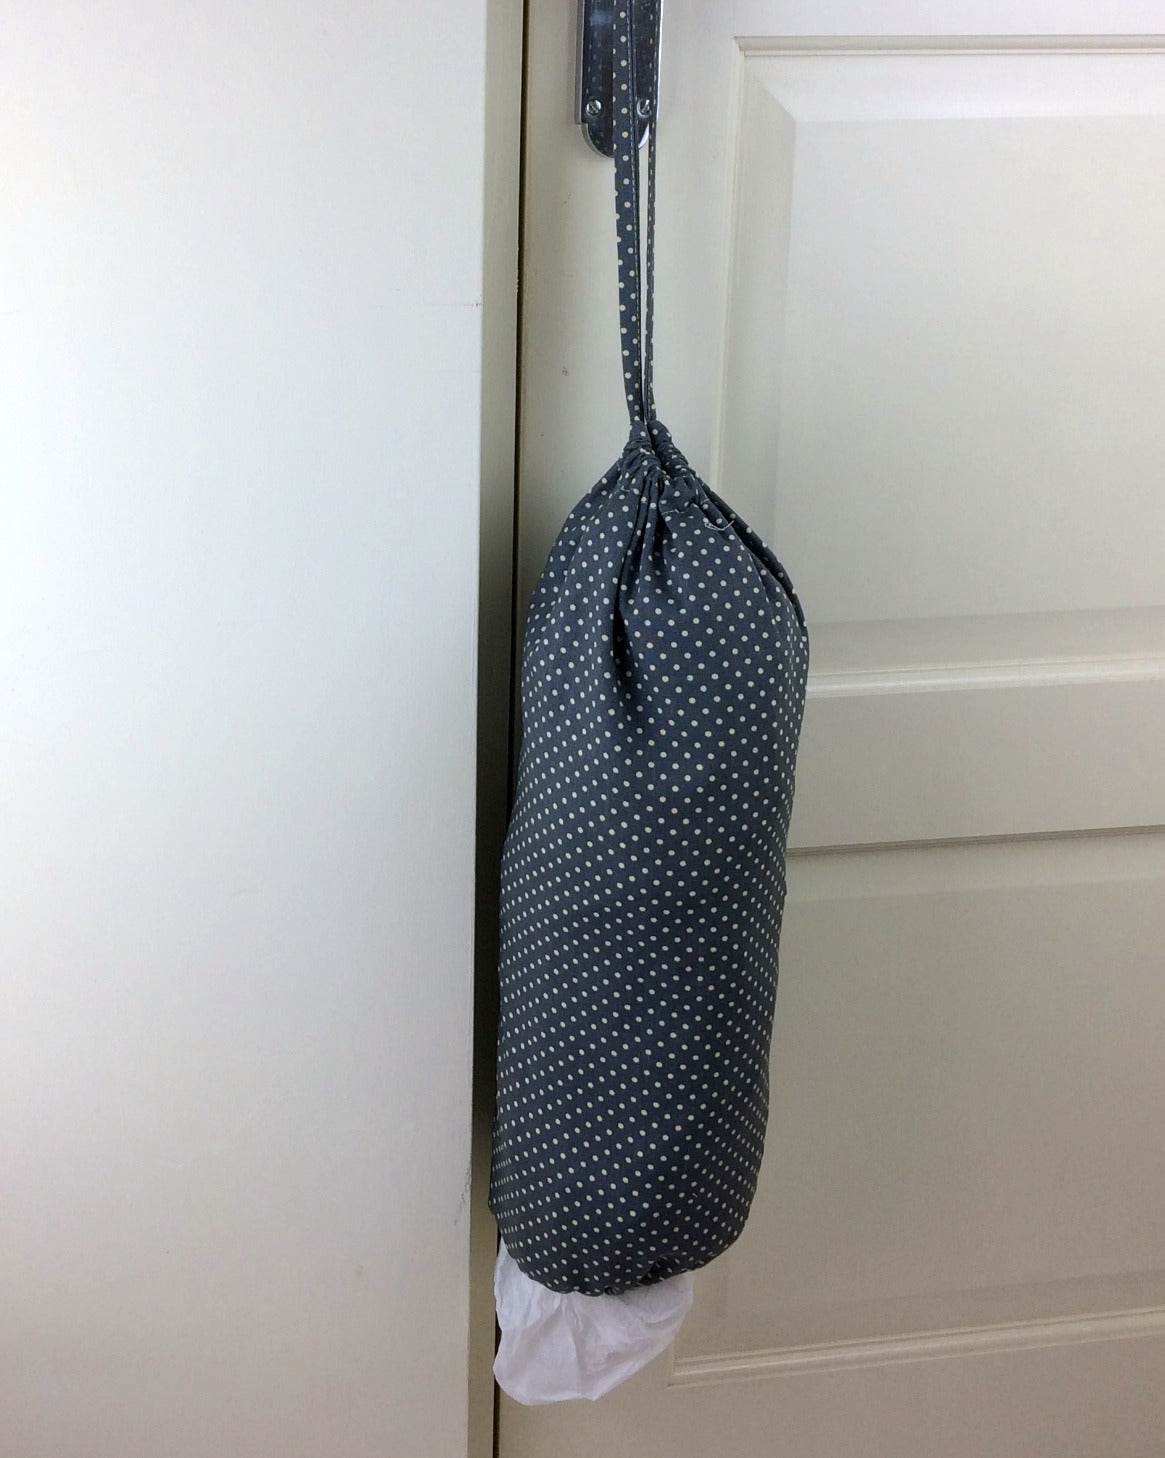 plastic bag dispenser and holder for those pesky bags for life that take over this one is a grey spotted canvas fabric